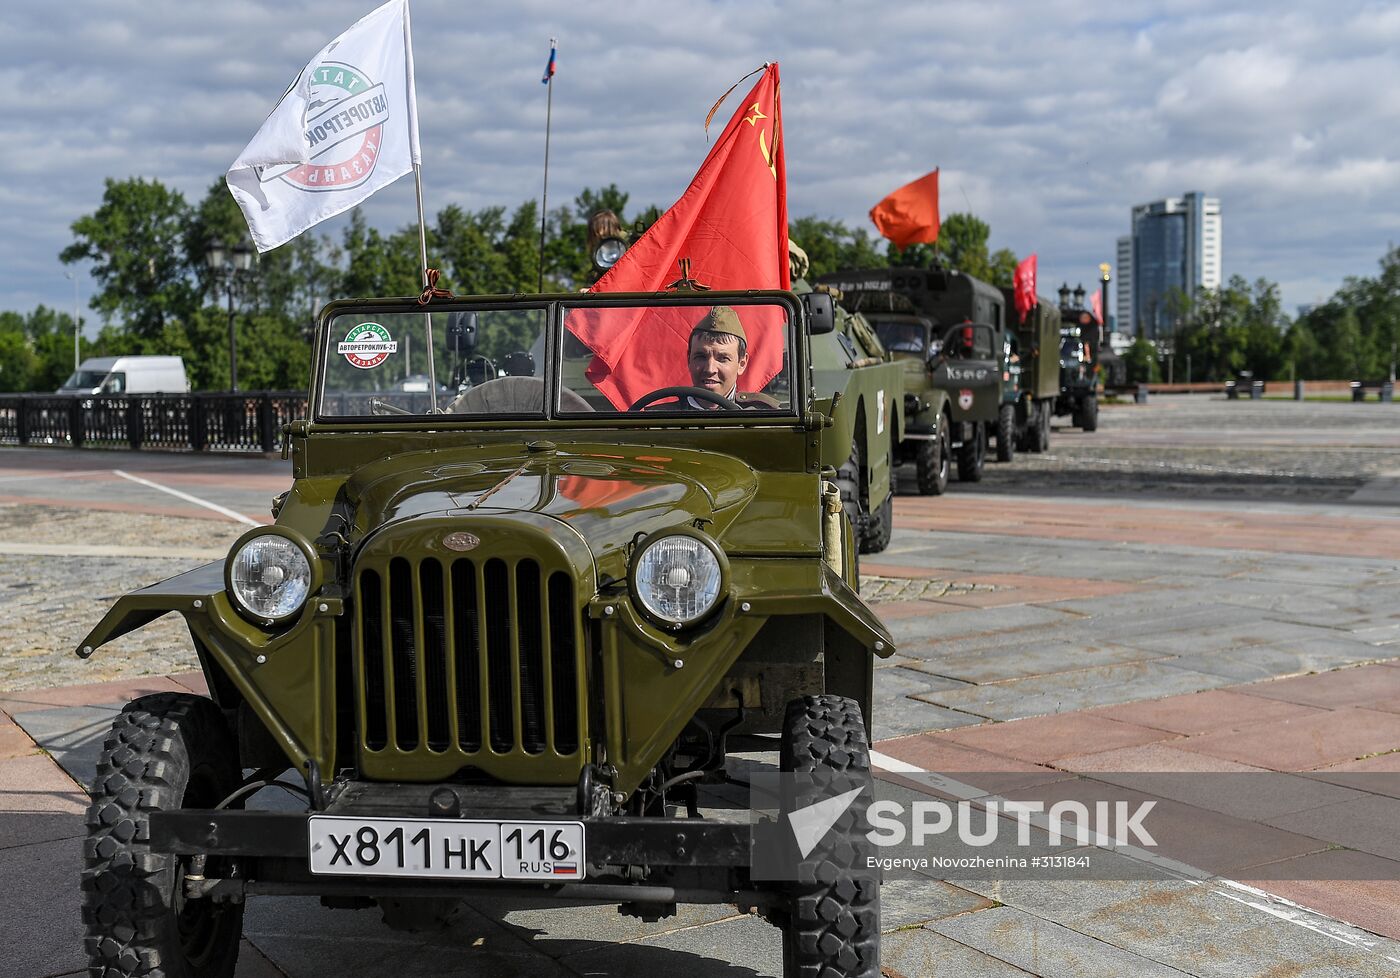 Road of Courage kicks off in Moscow